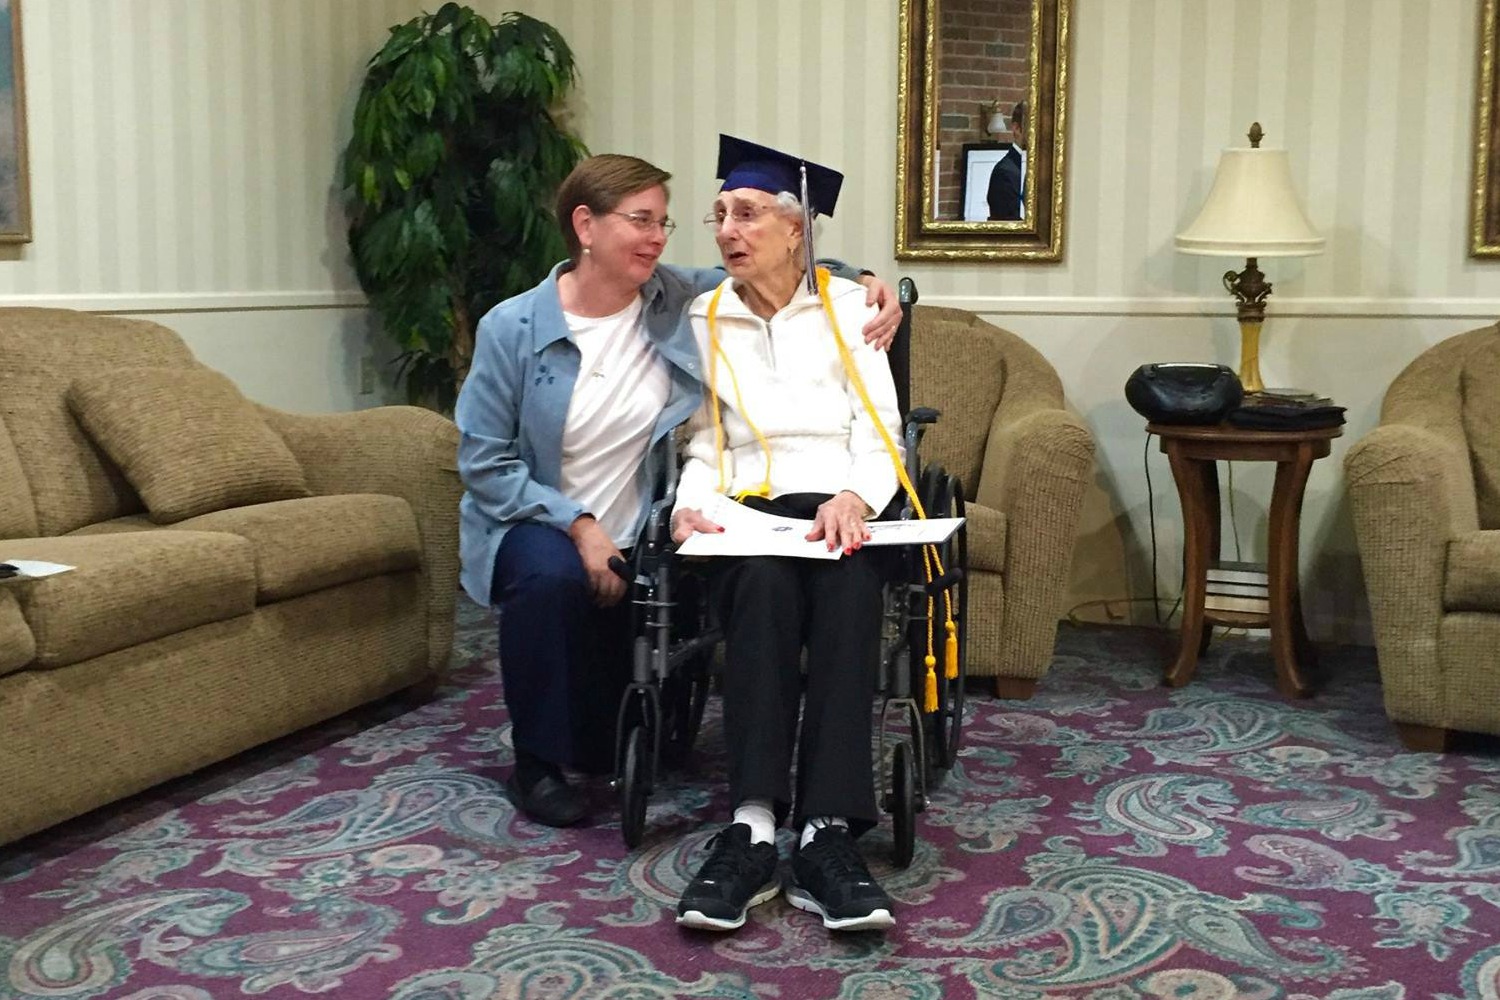 97-year old graduates from high school